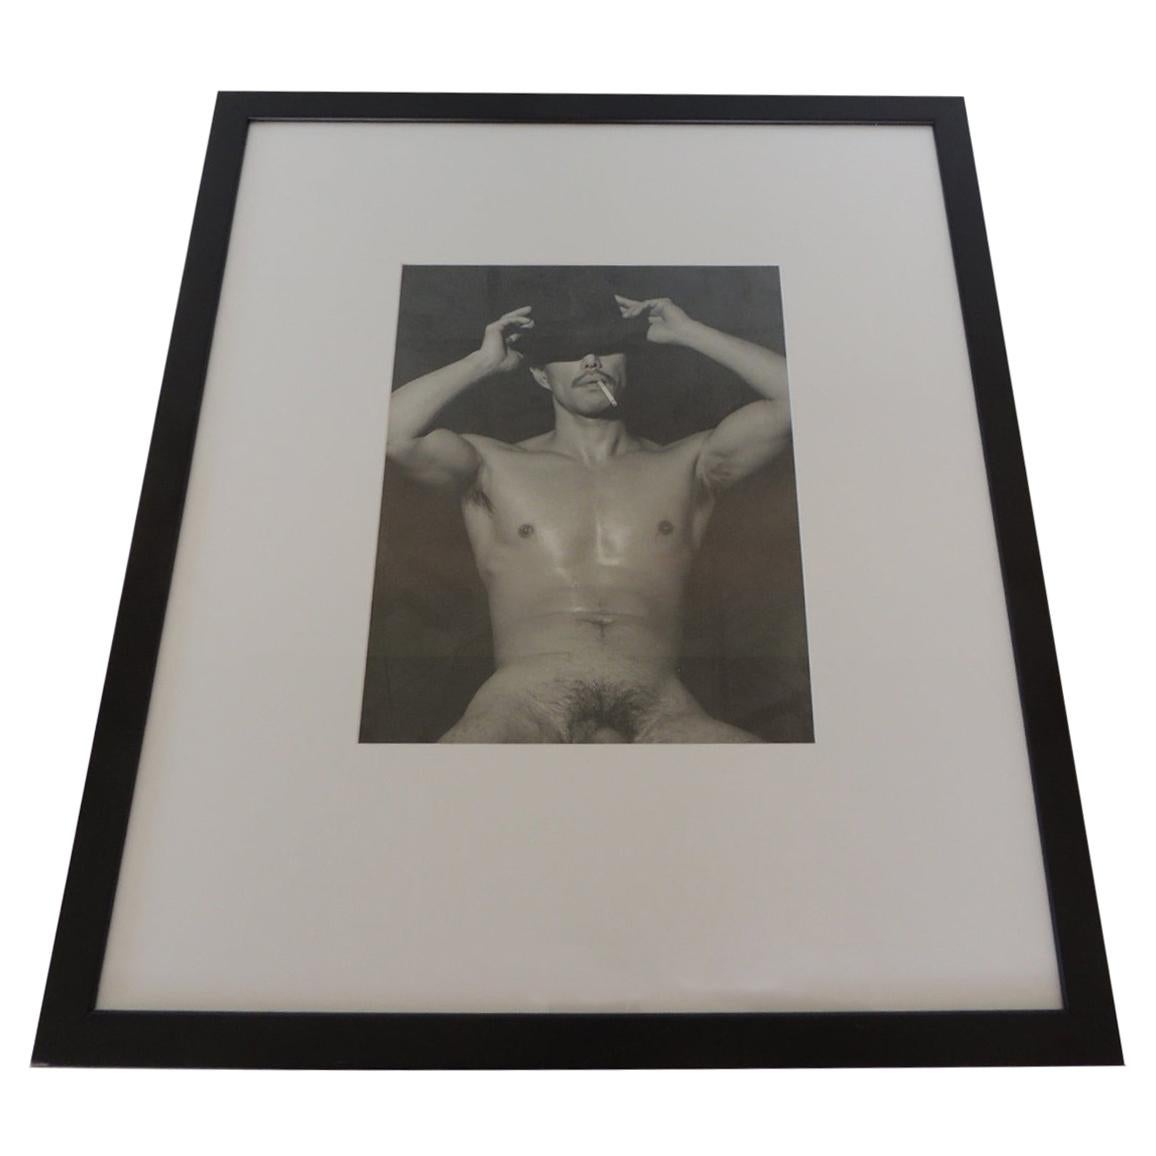 Nude Black & White Abstract Photograph of Male Torso with Hat and Cigarette